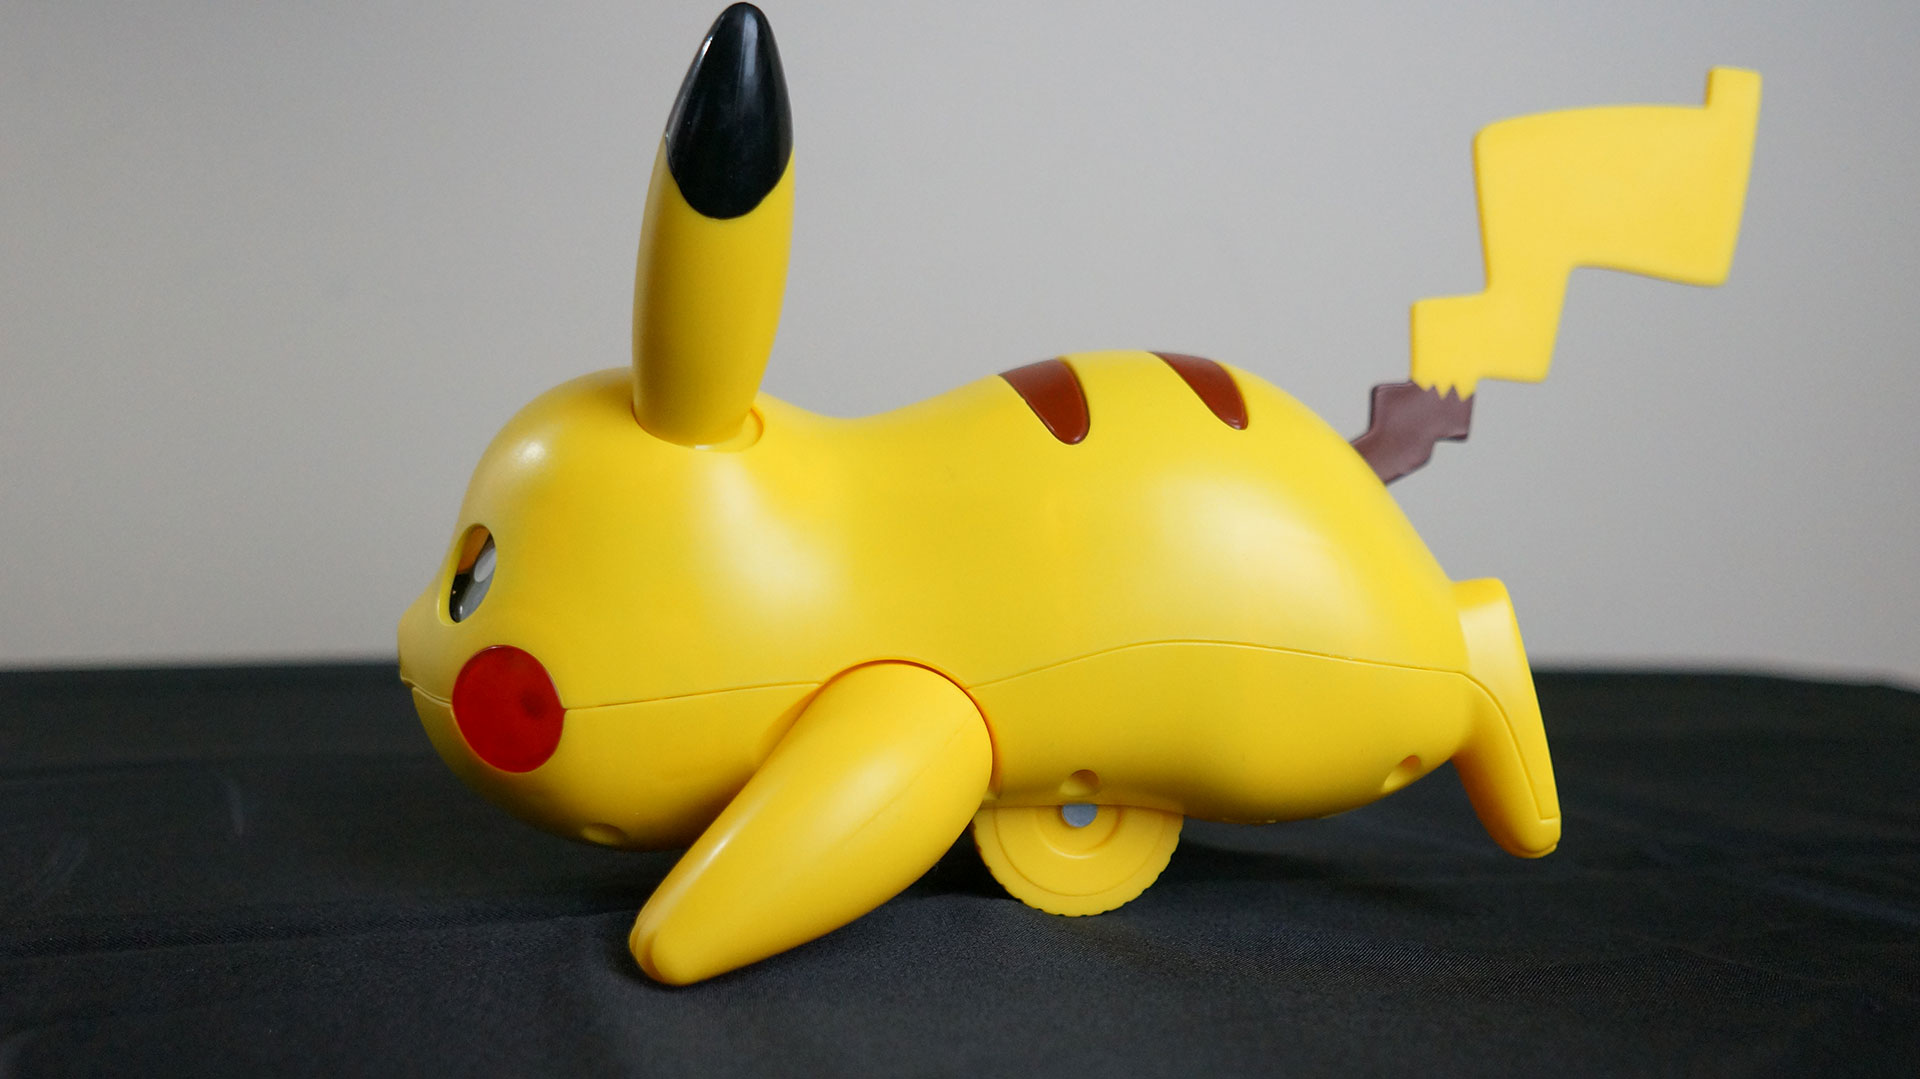 I Wish There Were Pokémon Toys Like This When I Was A Kid